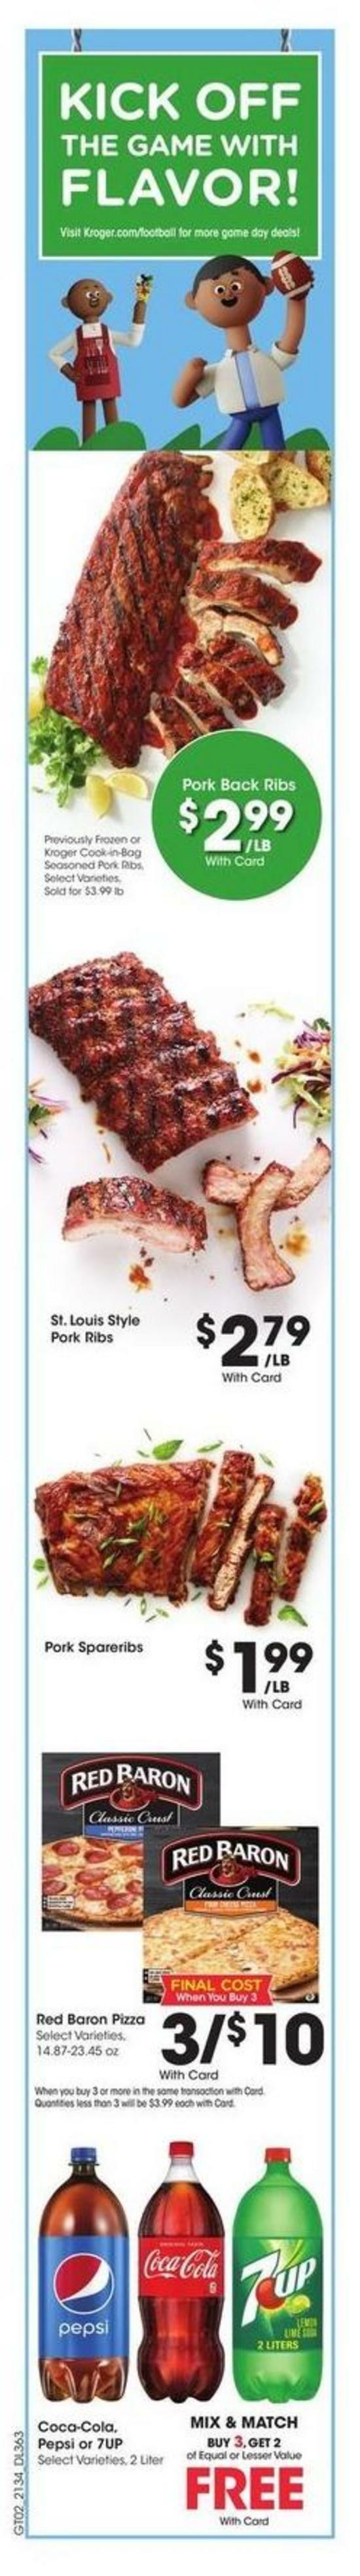 Kroger Weekly Ad from September 22